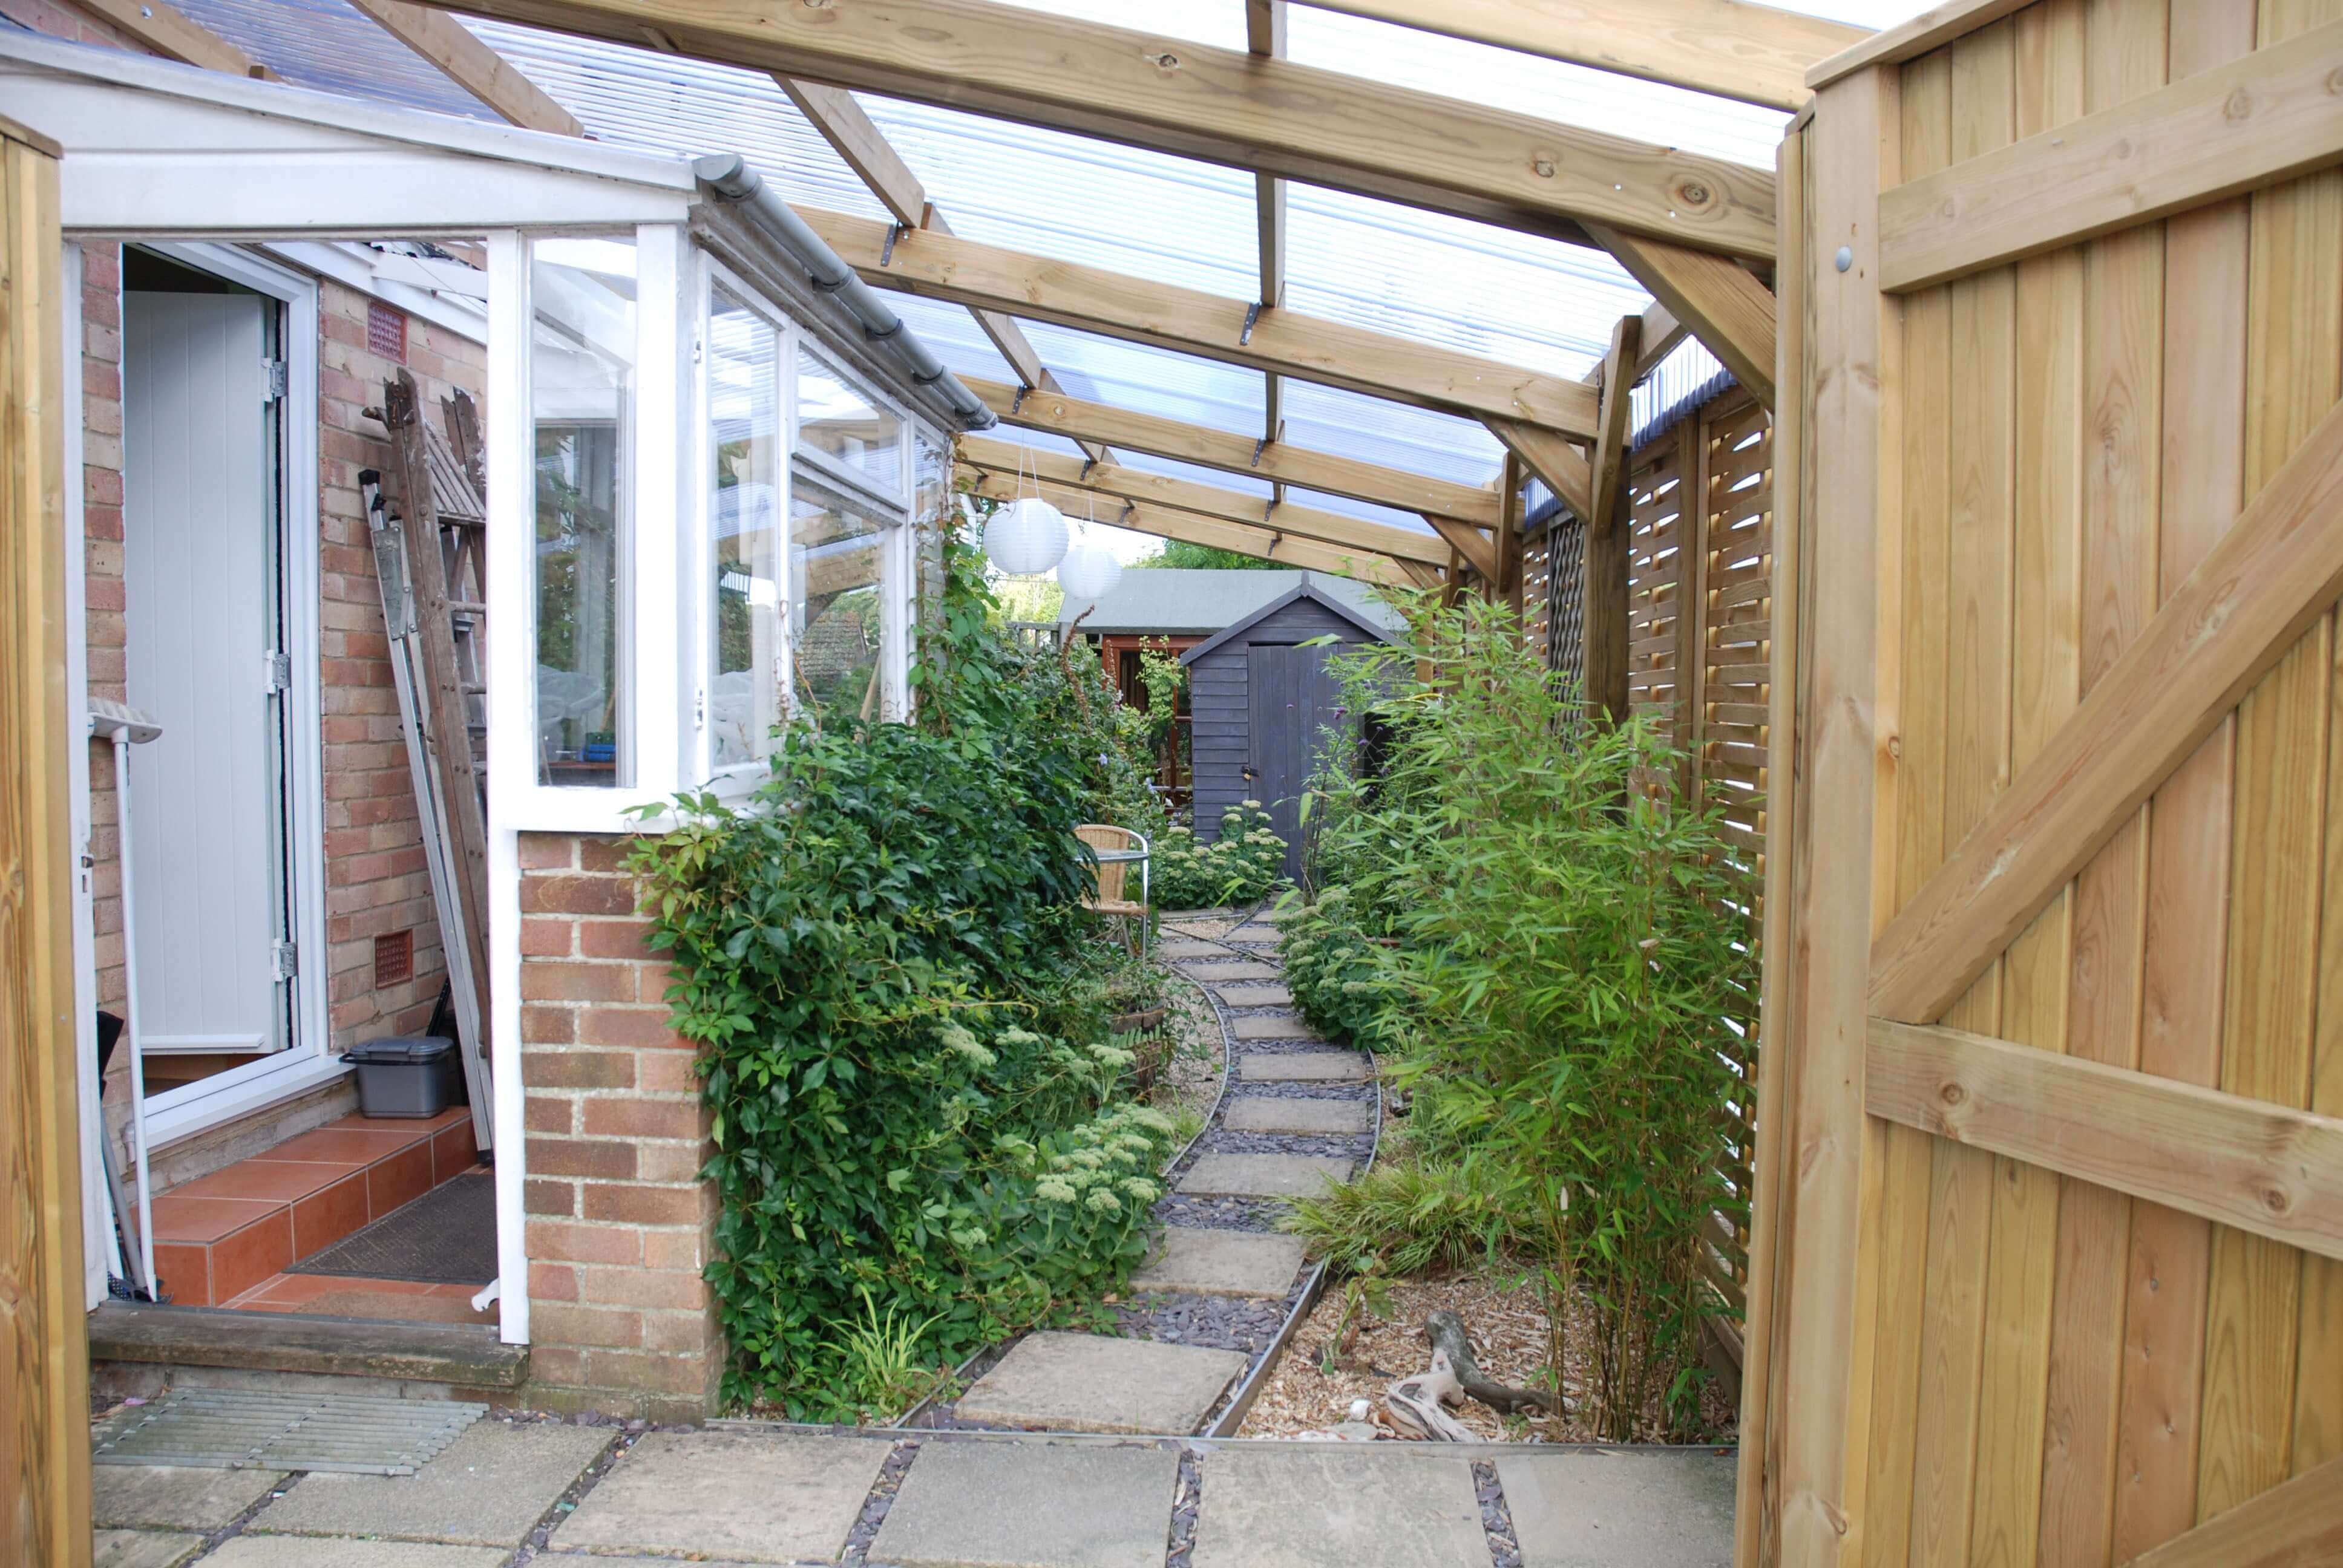 Pergola with plastic roofing on Woven fencing